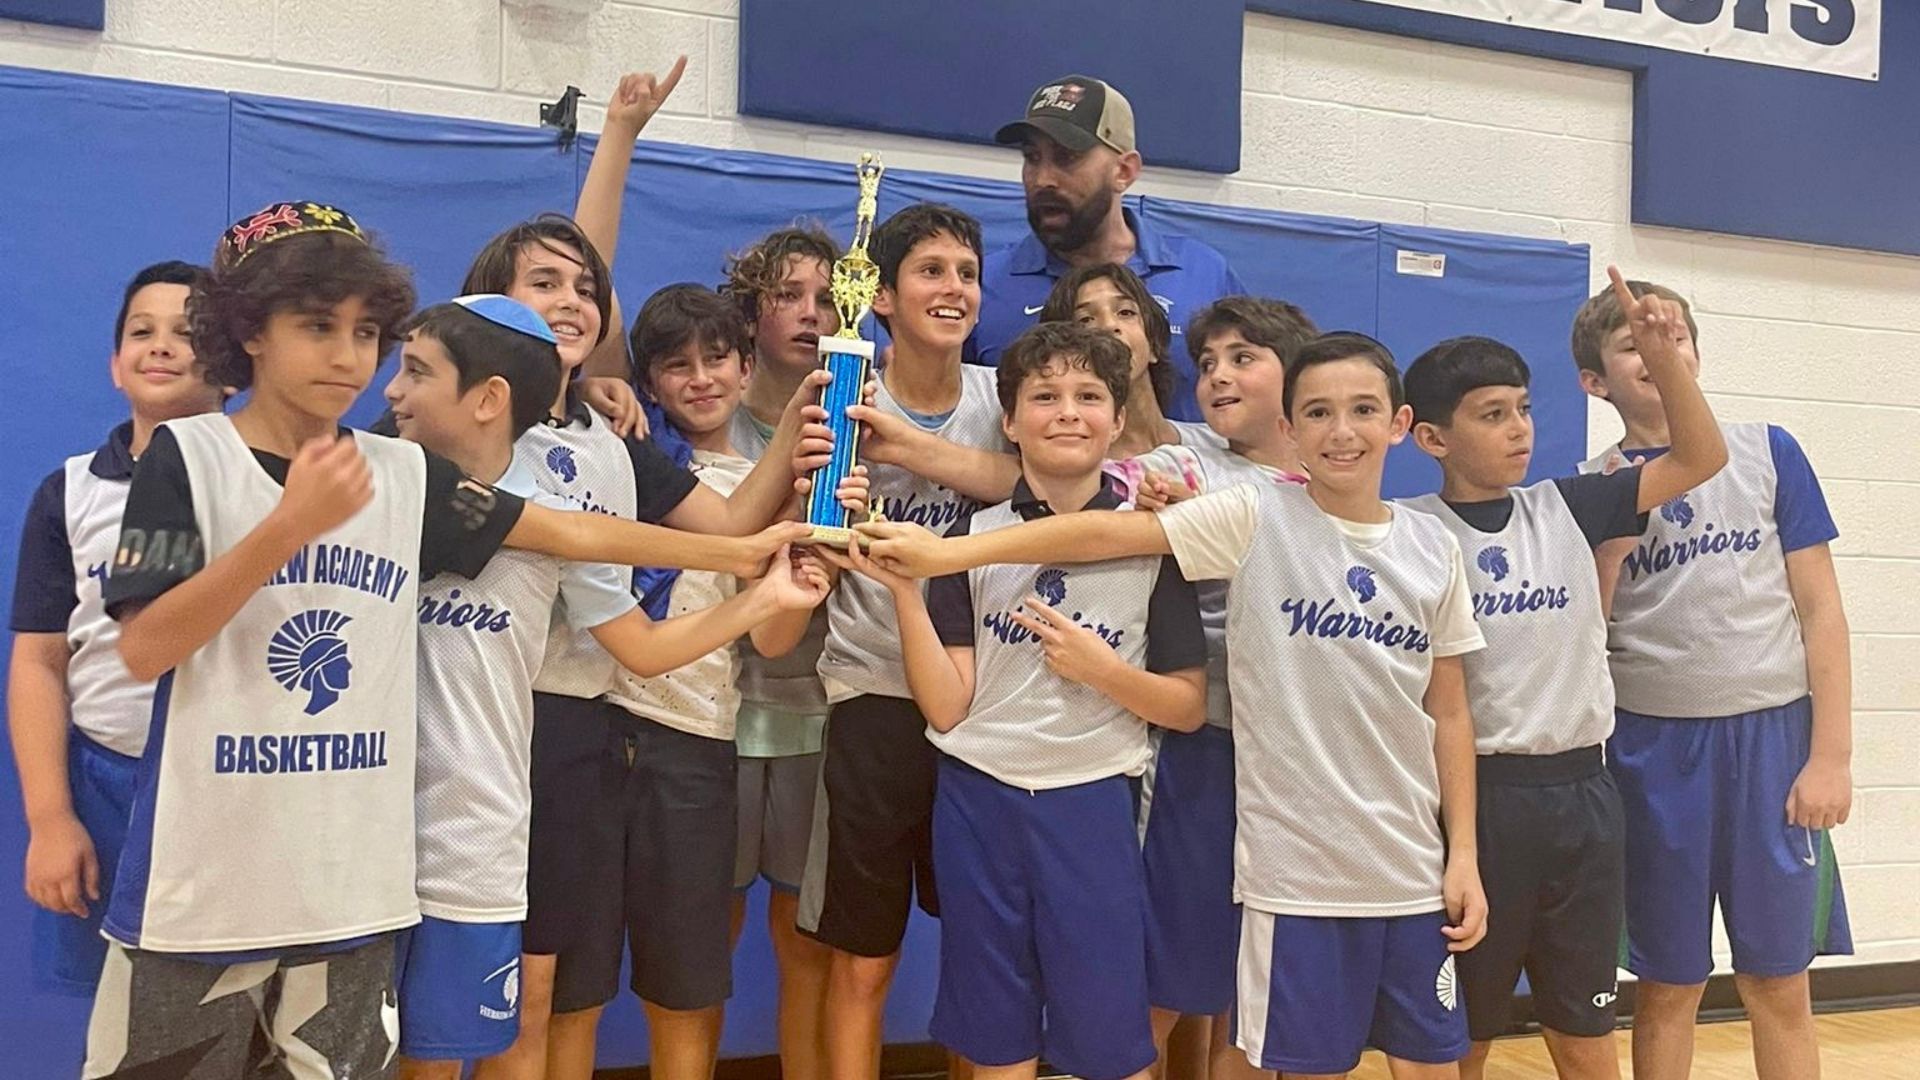 A group of young boys holding a trophy in a gym